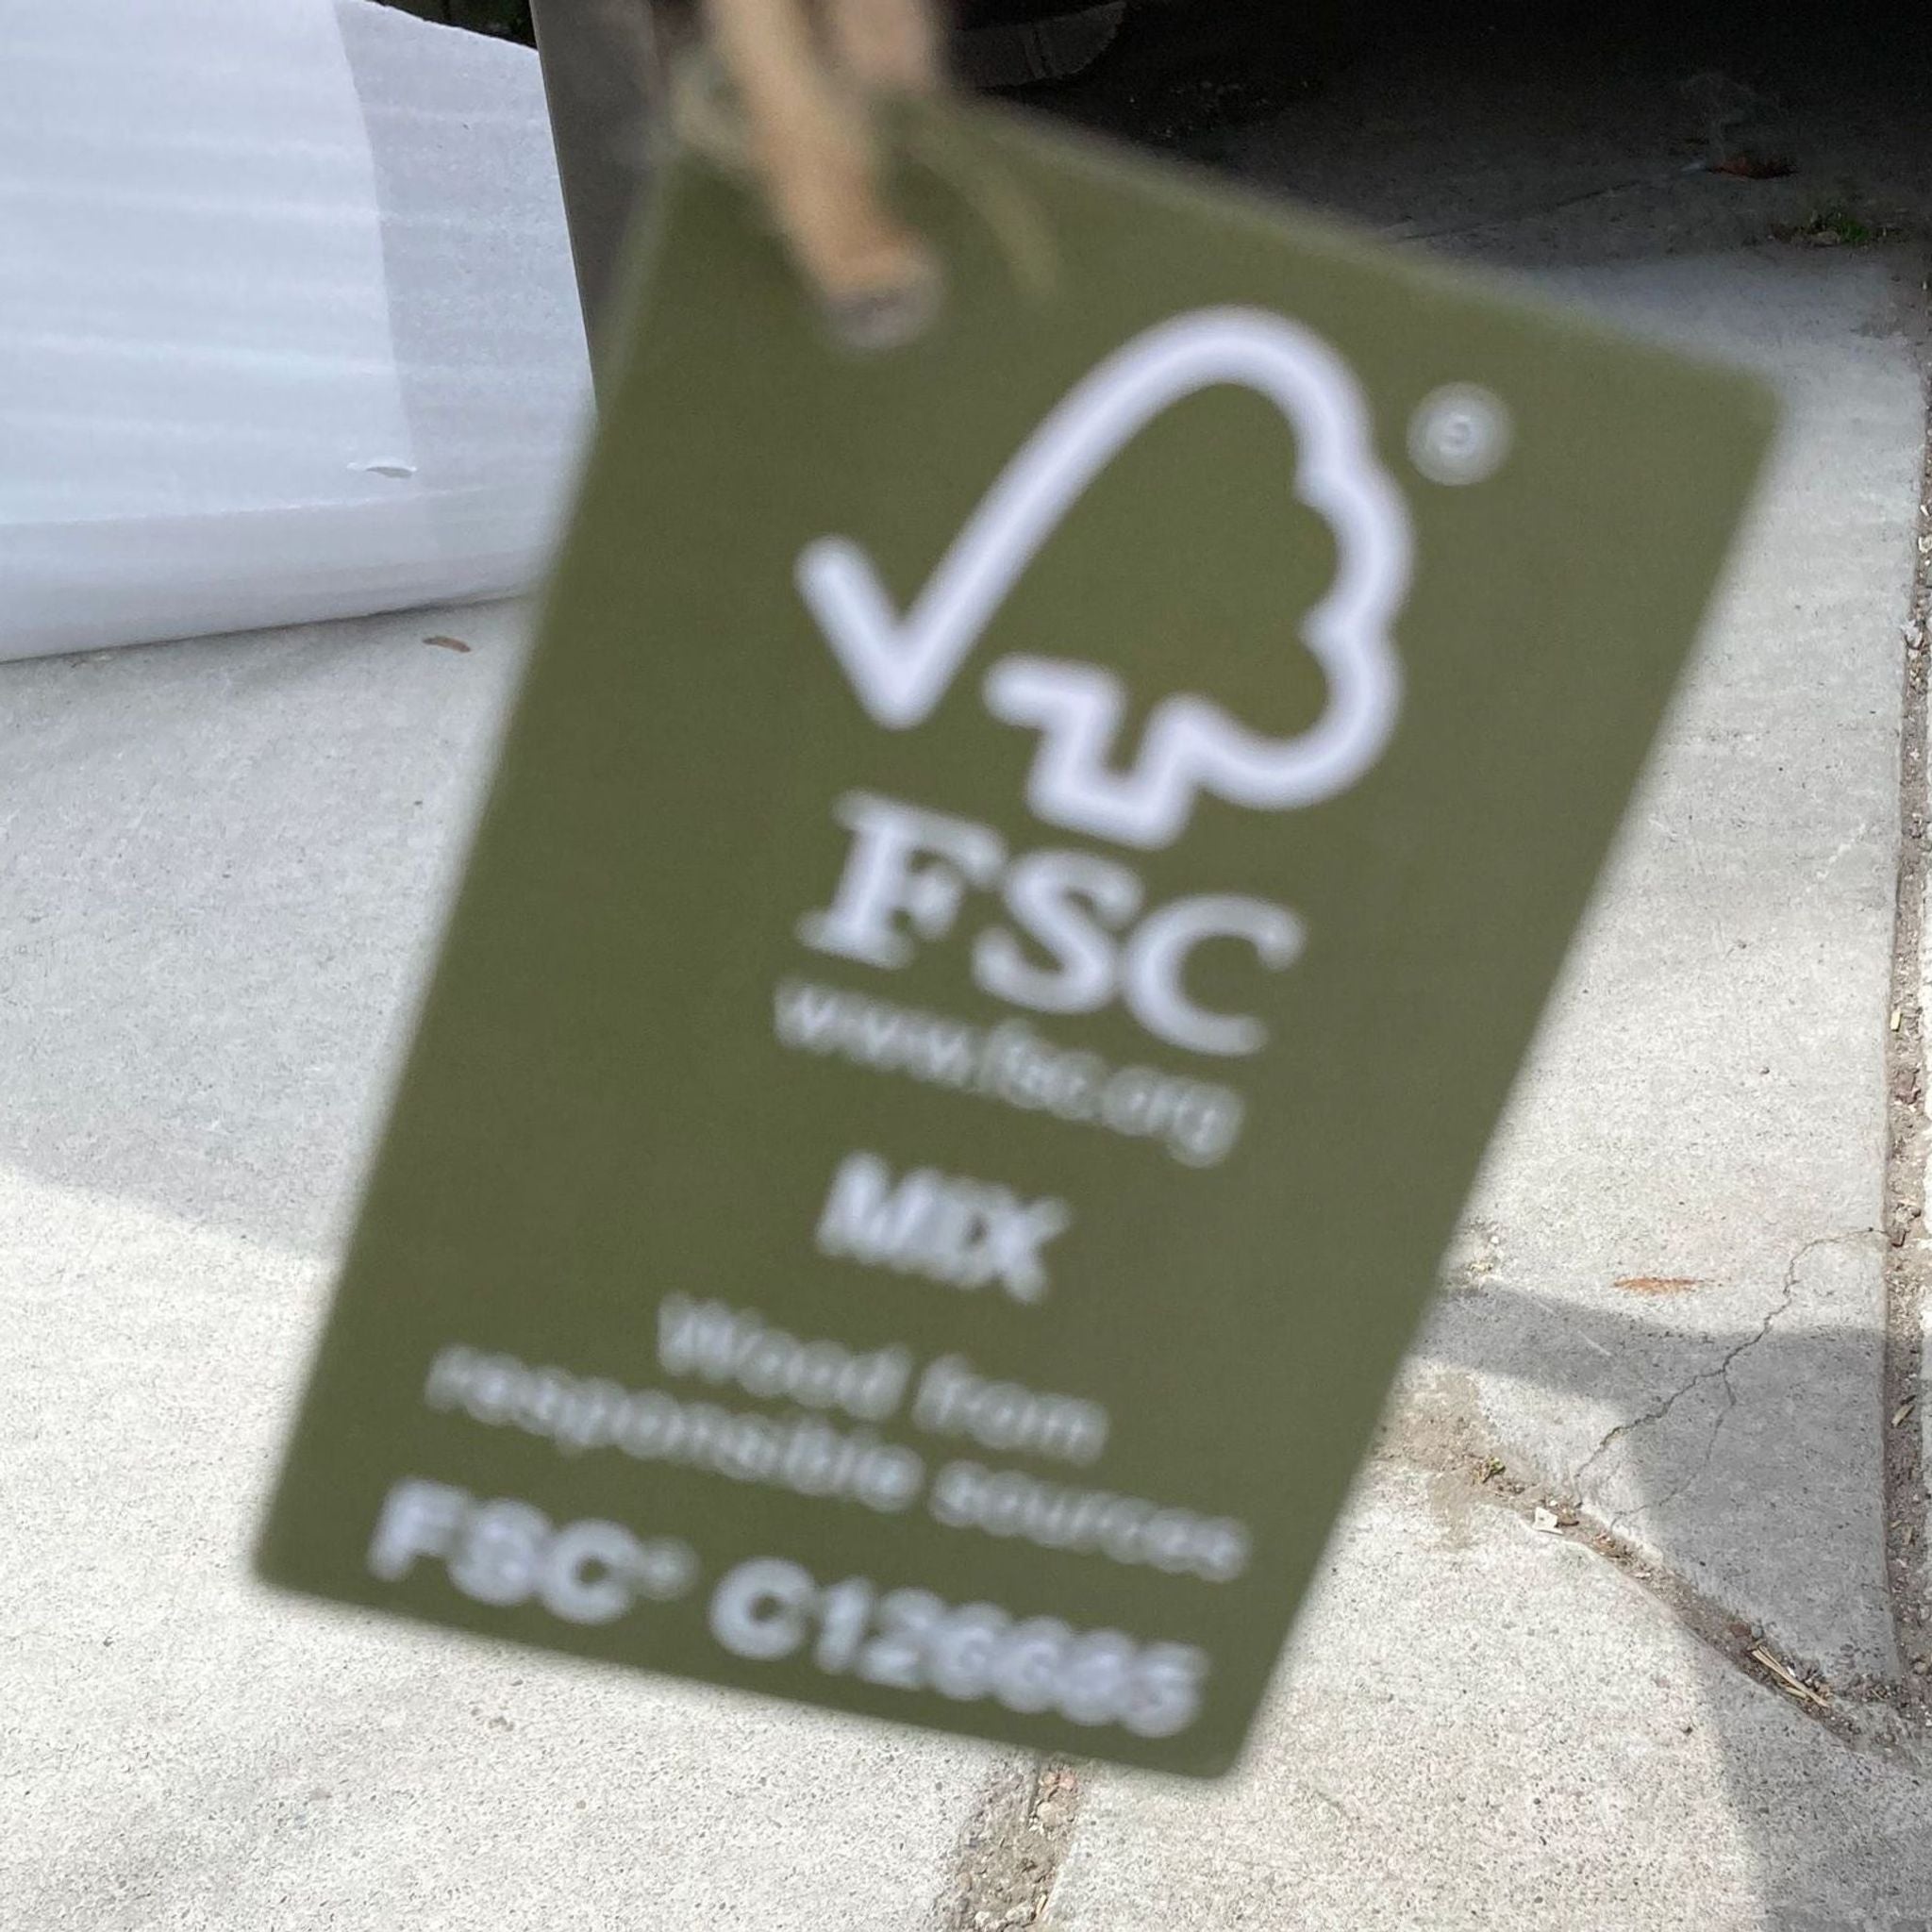 2. "Close-up of a green FSC certification tag indicating responsible wood sourcing for furniture."